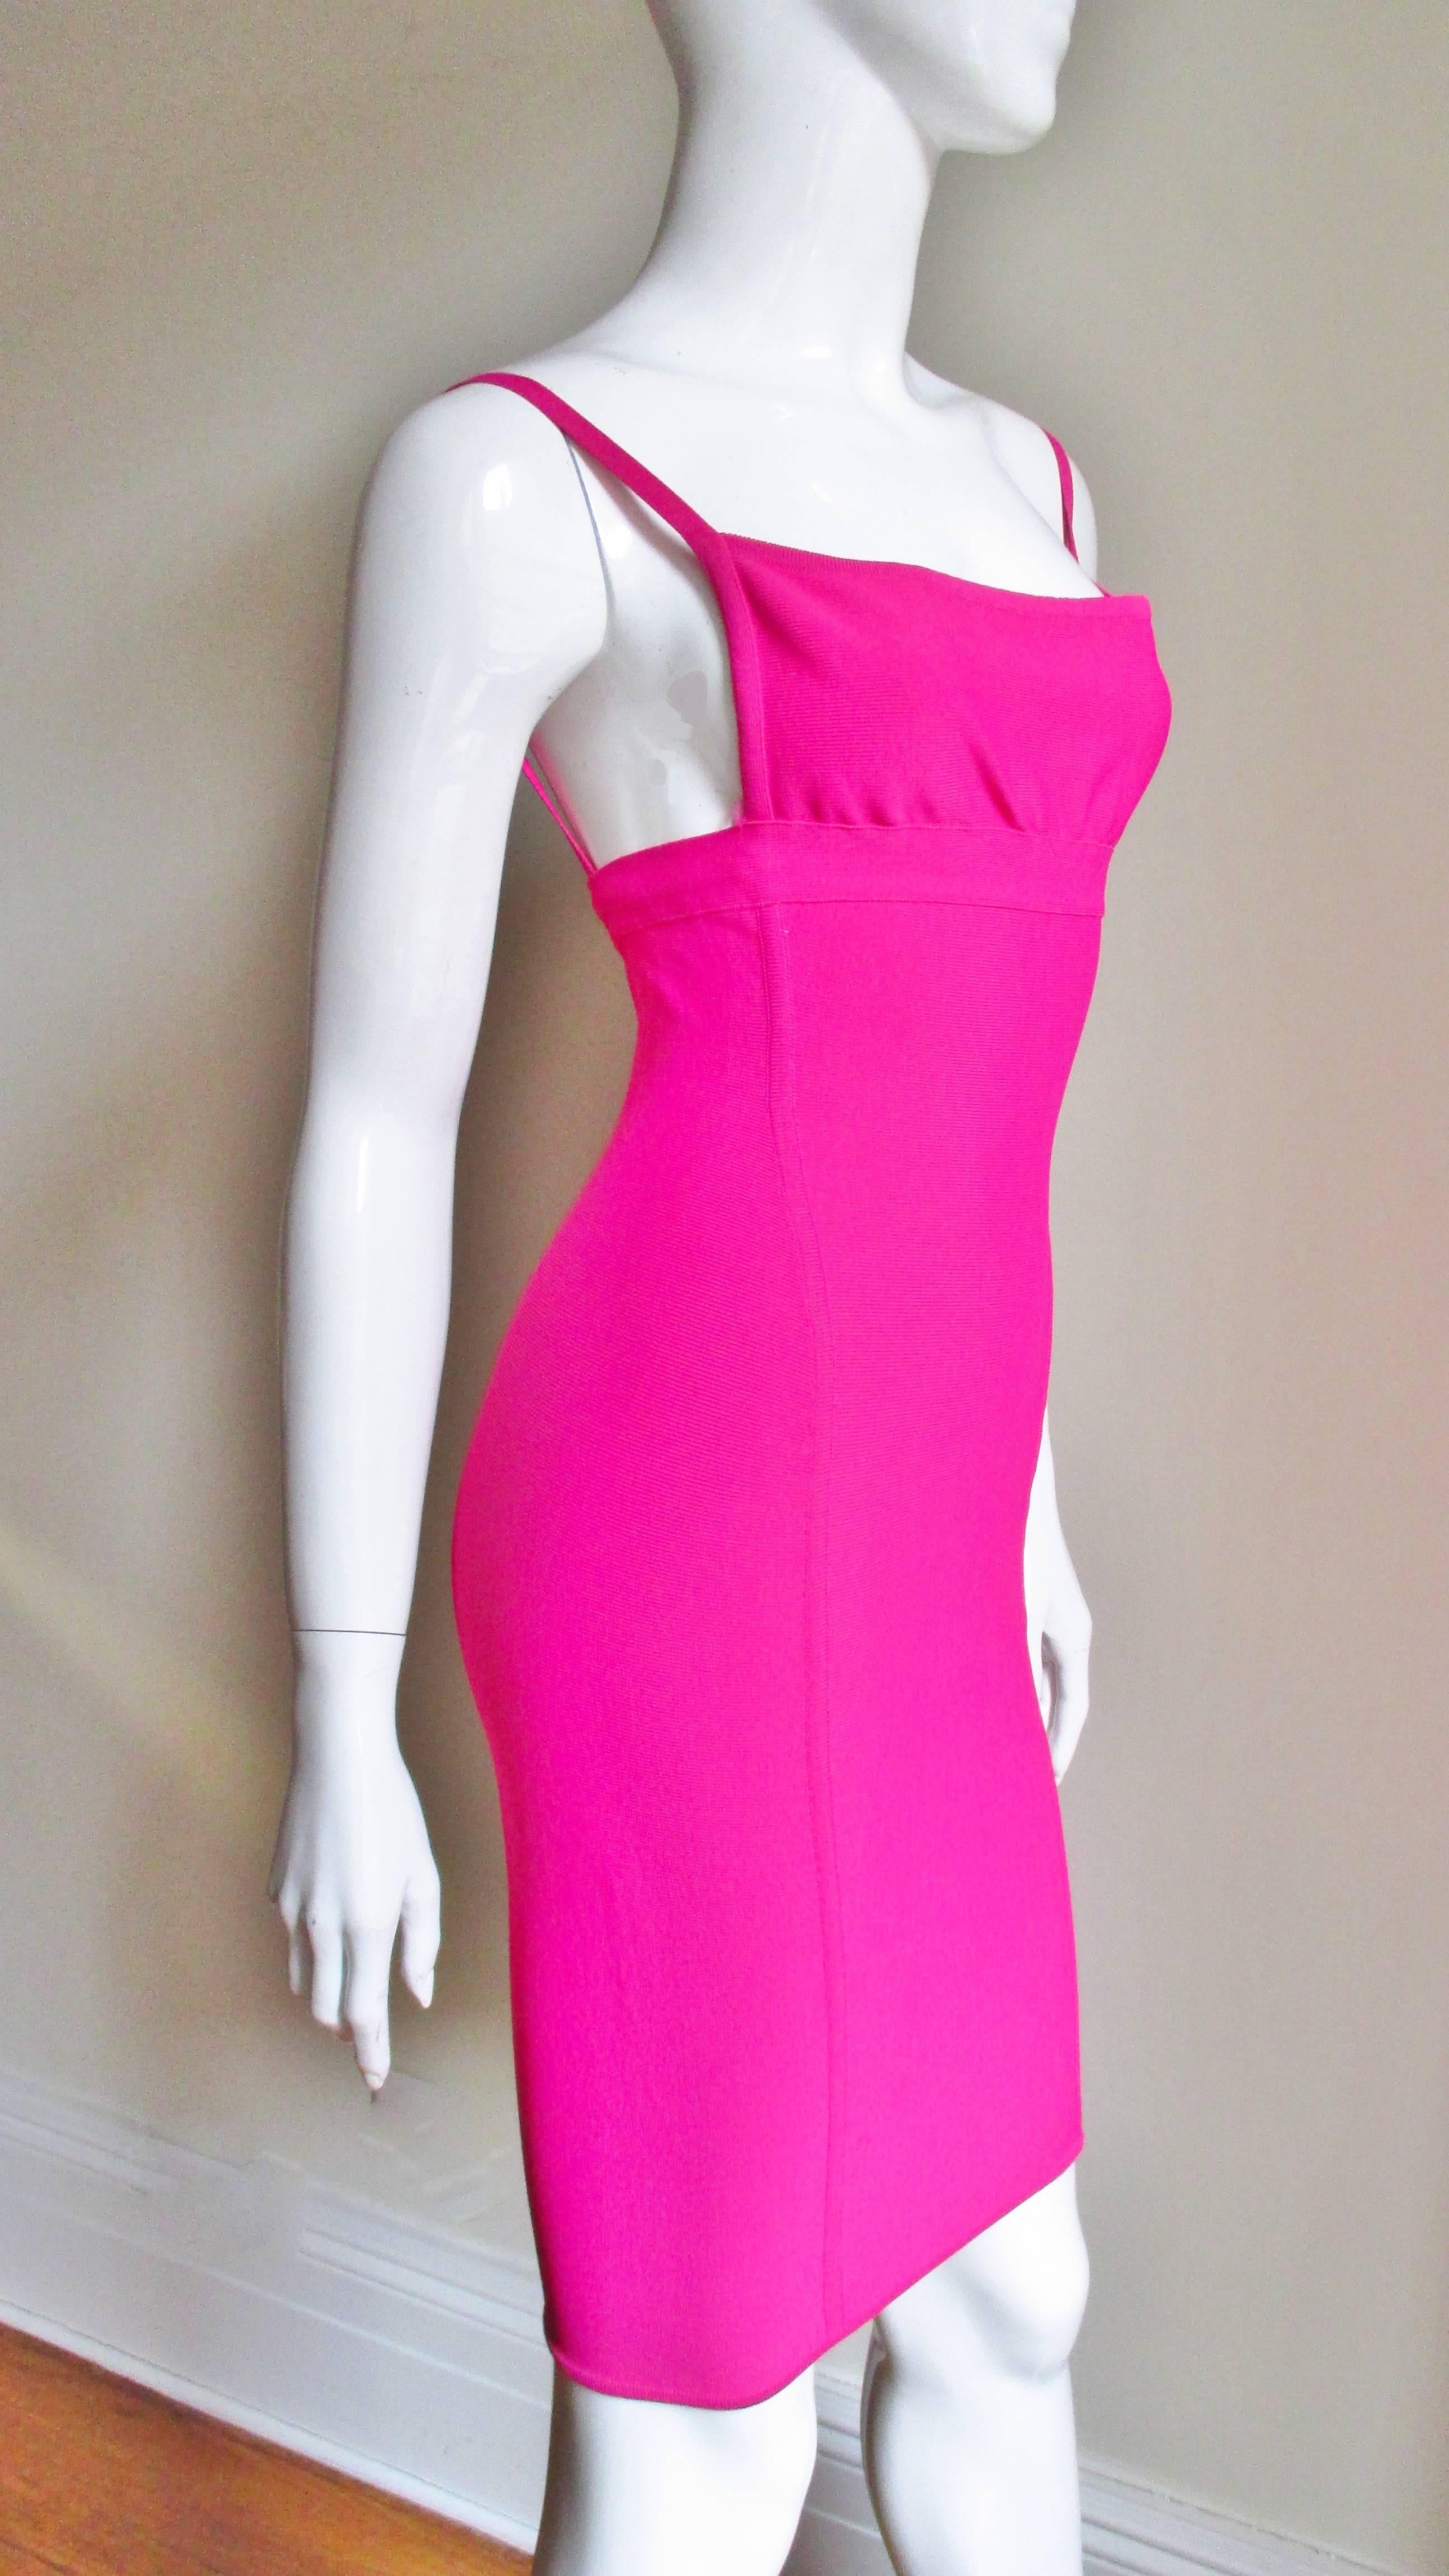 Herve Leger Pink Bodycon Dress 1990s For Sale 1